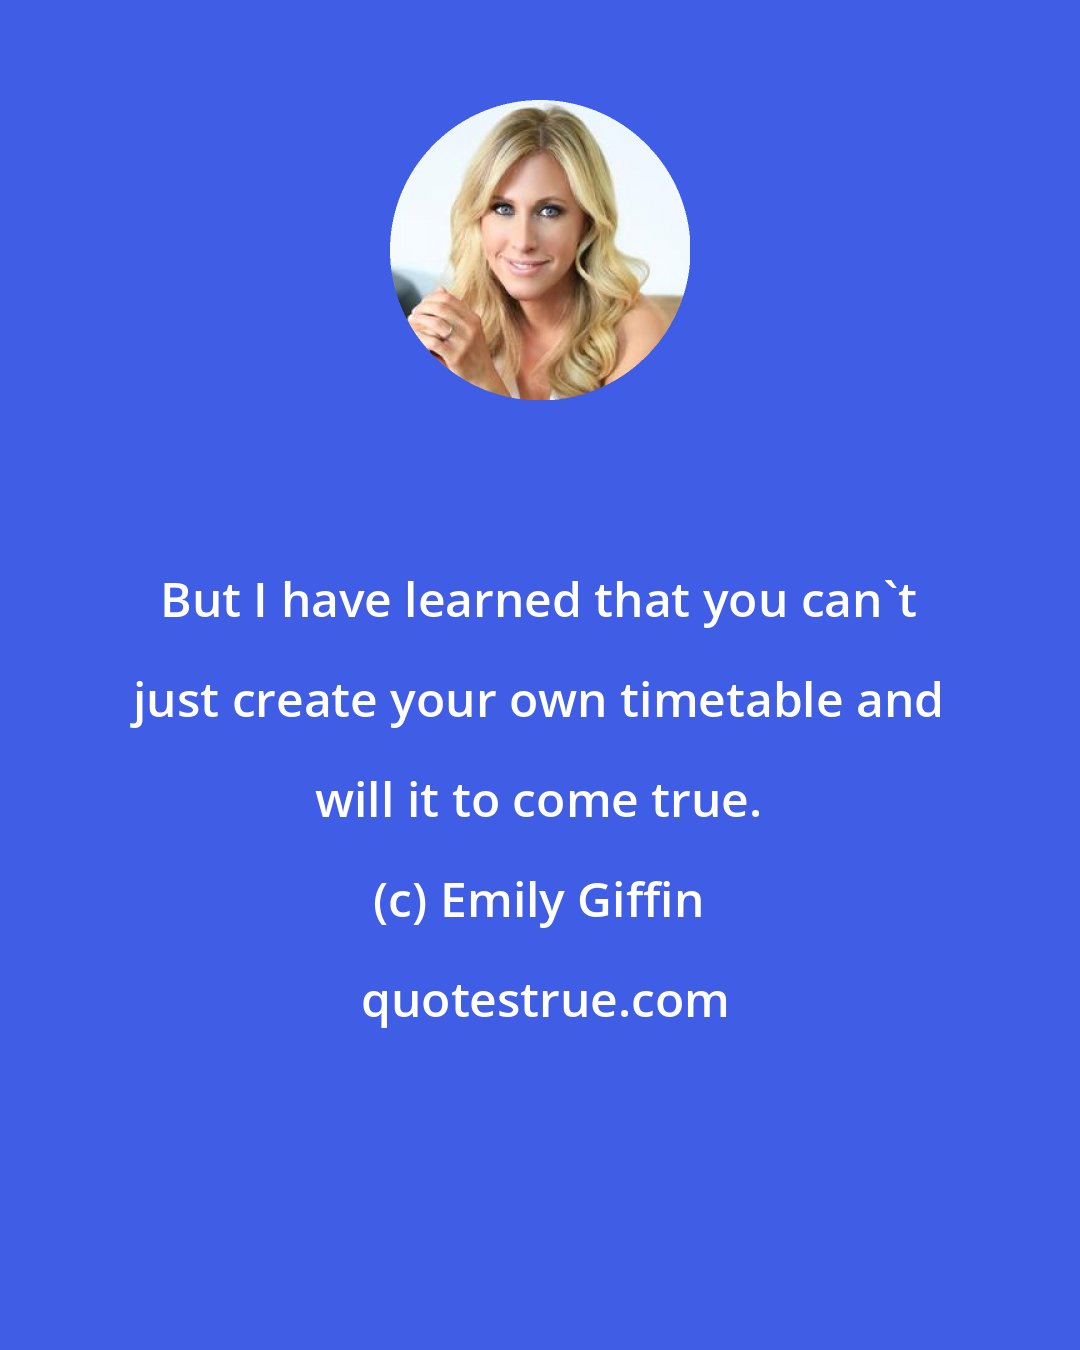 Emily Giffin: But I have learned that you can't just create your own timetable and will it to come true.